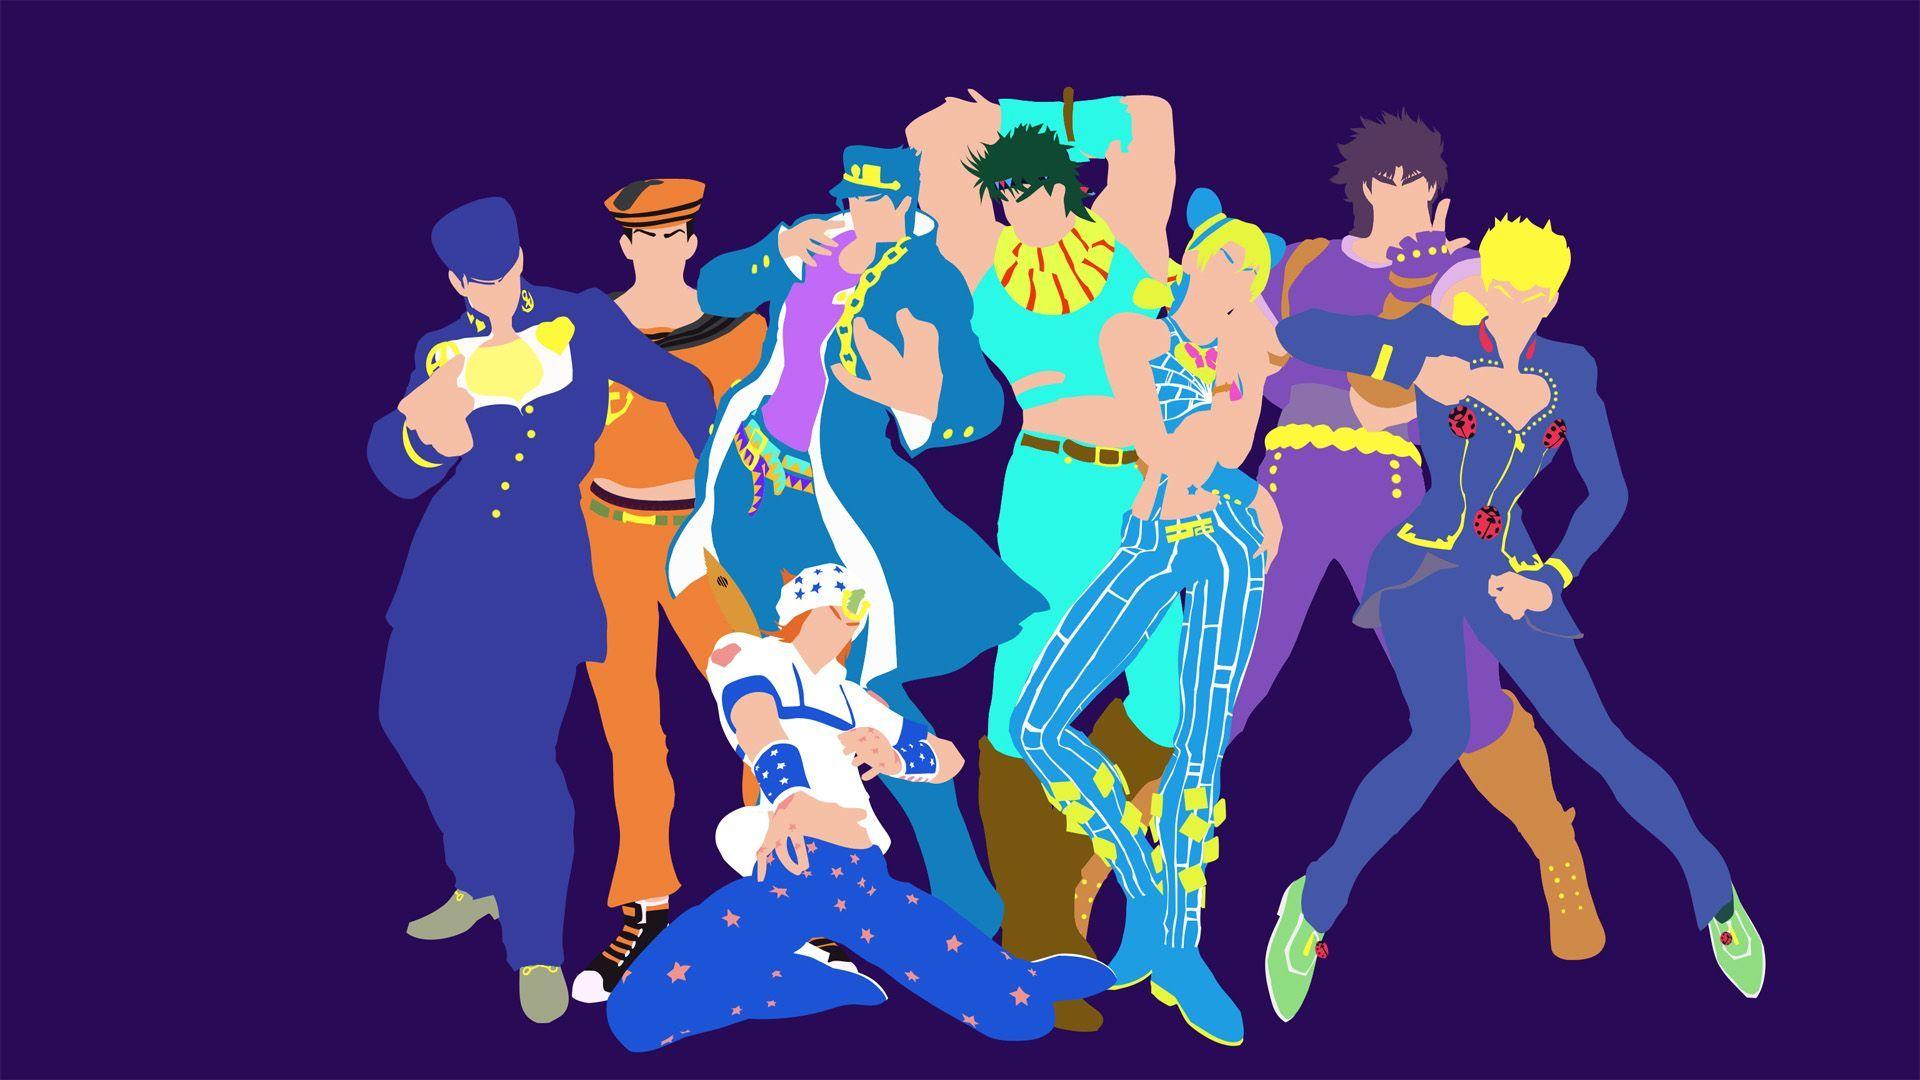 I made some minimalist wallpaper!, StardustCrusaders avec